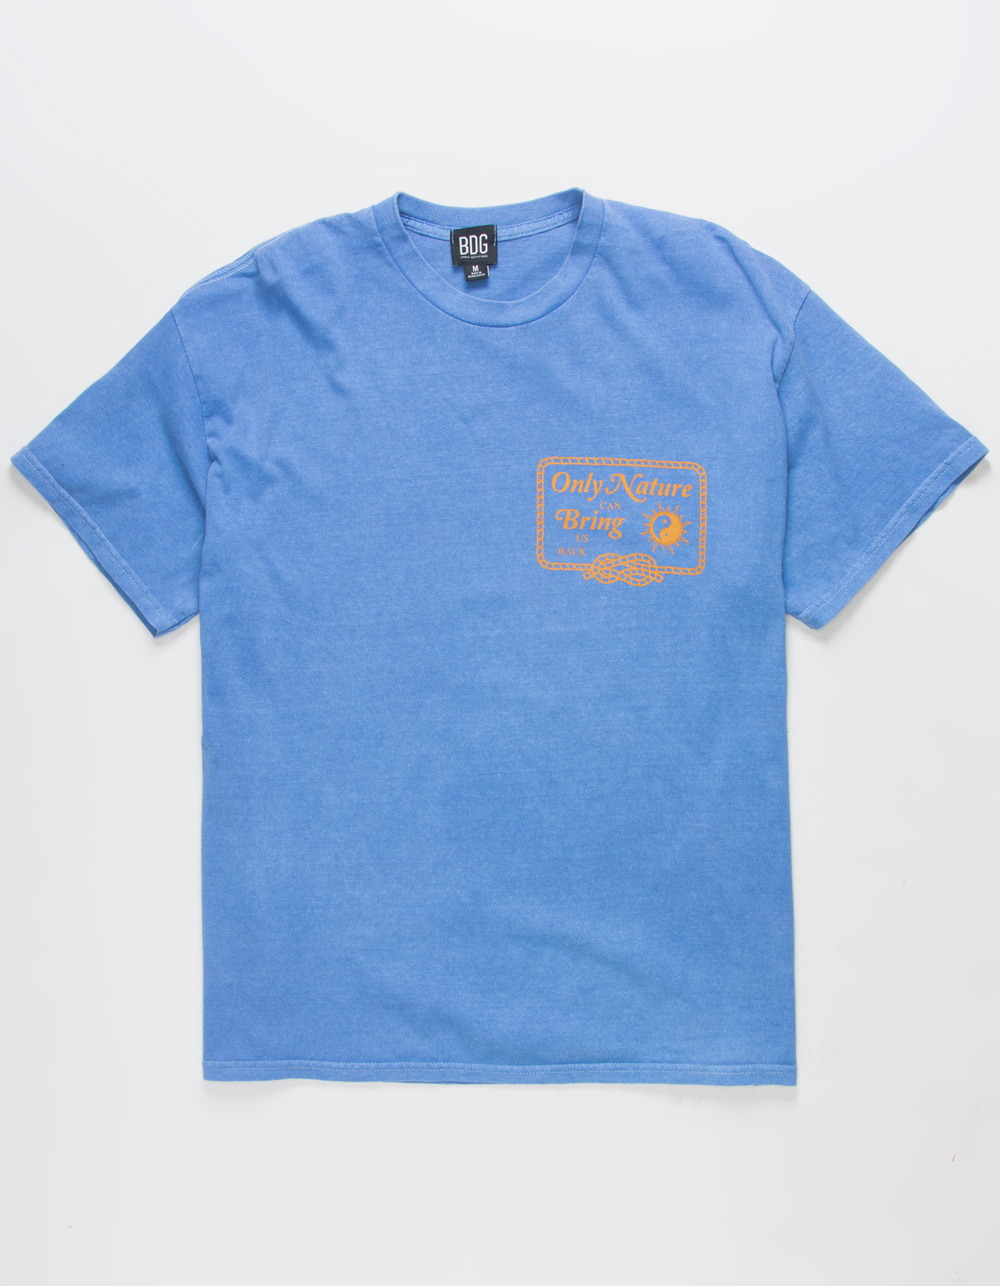 BDG Urban Outfitters Photograph Peace Mens Tee - BLUE | Tillys